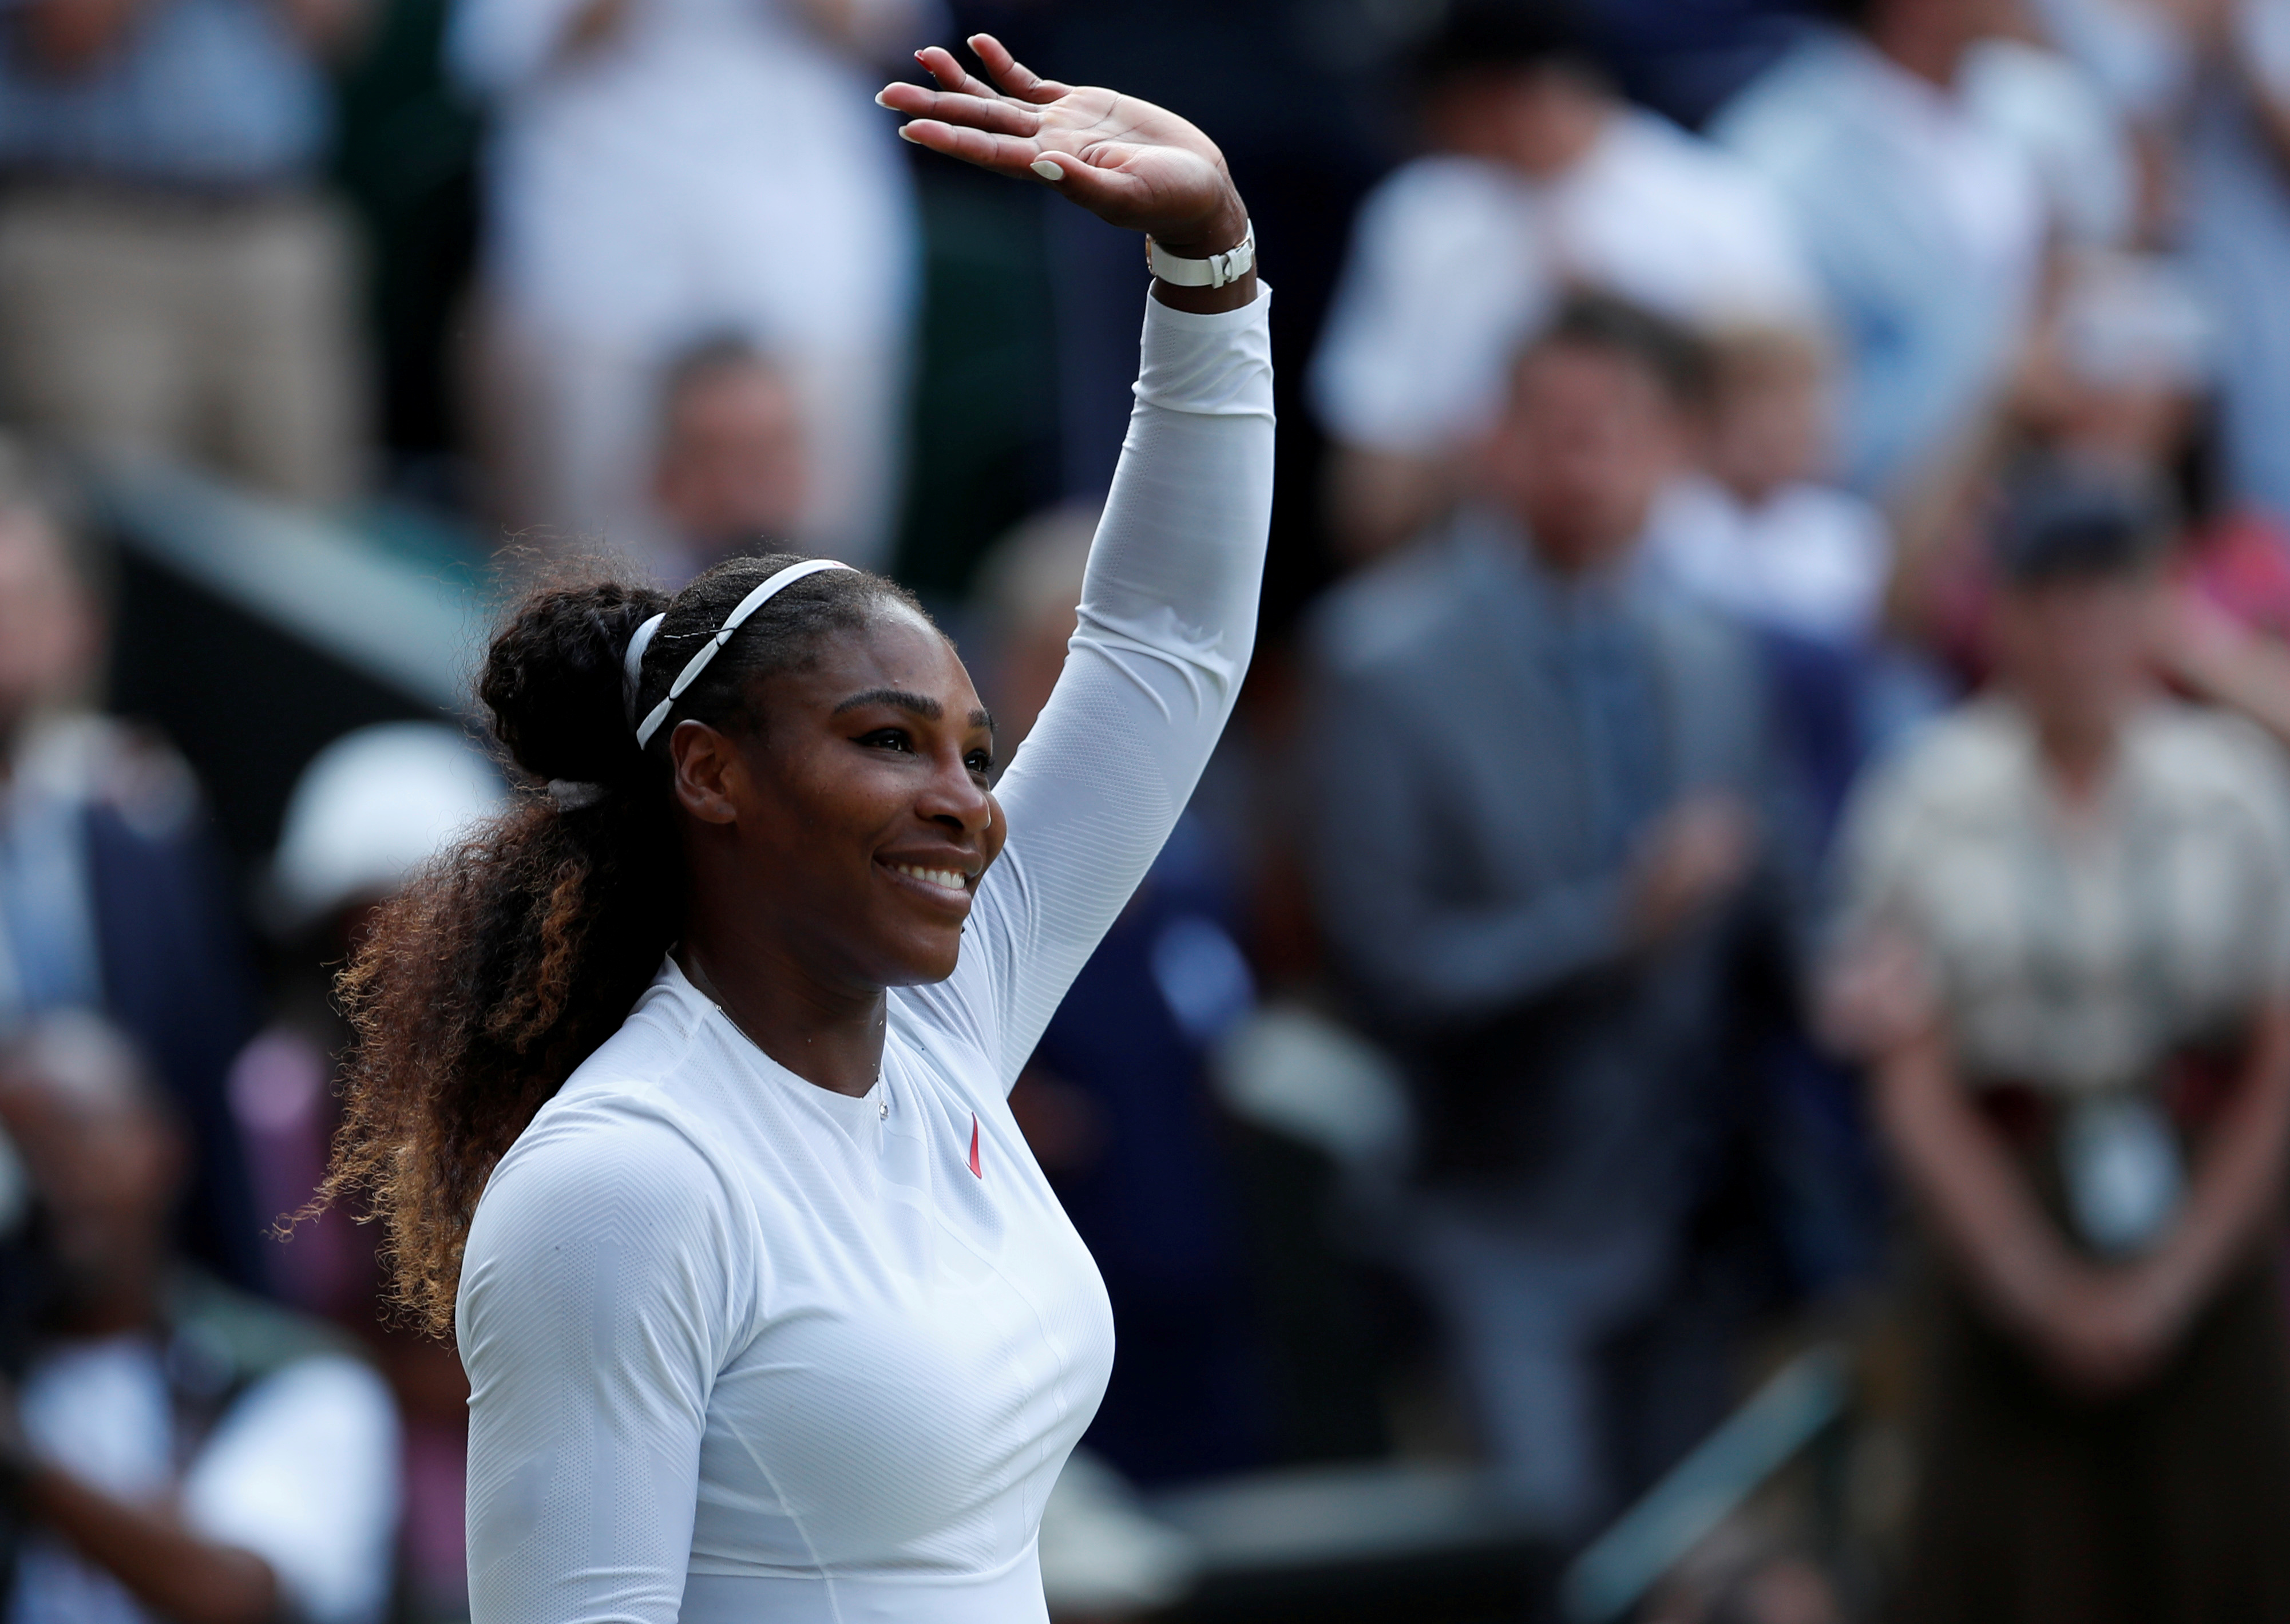 Serena Williams to Compete at Wimbledon After Receiving Wild-card Invitation